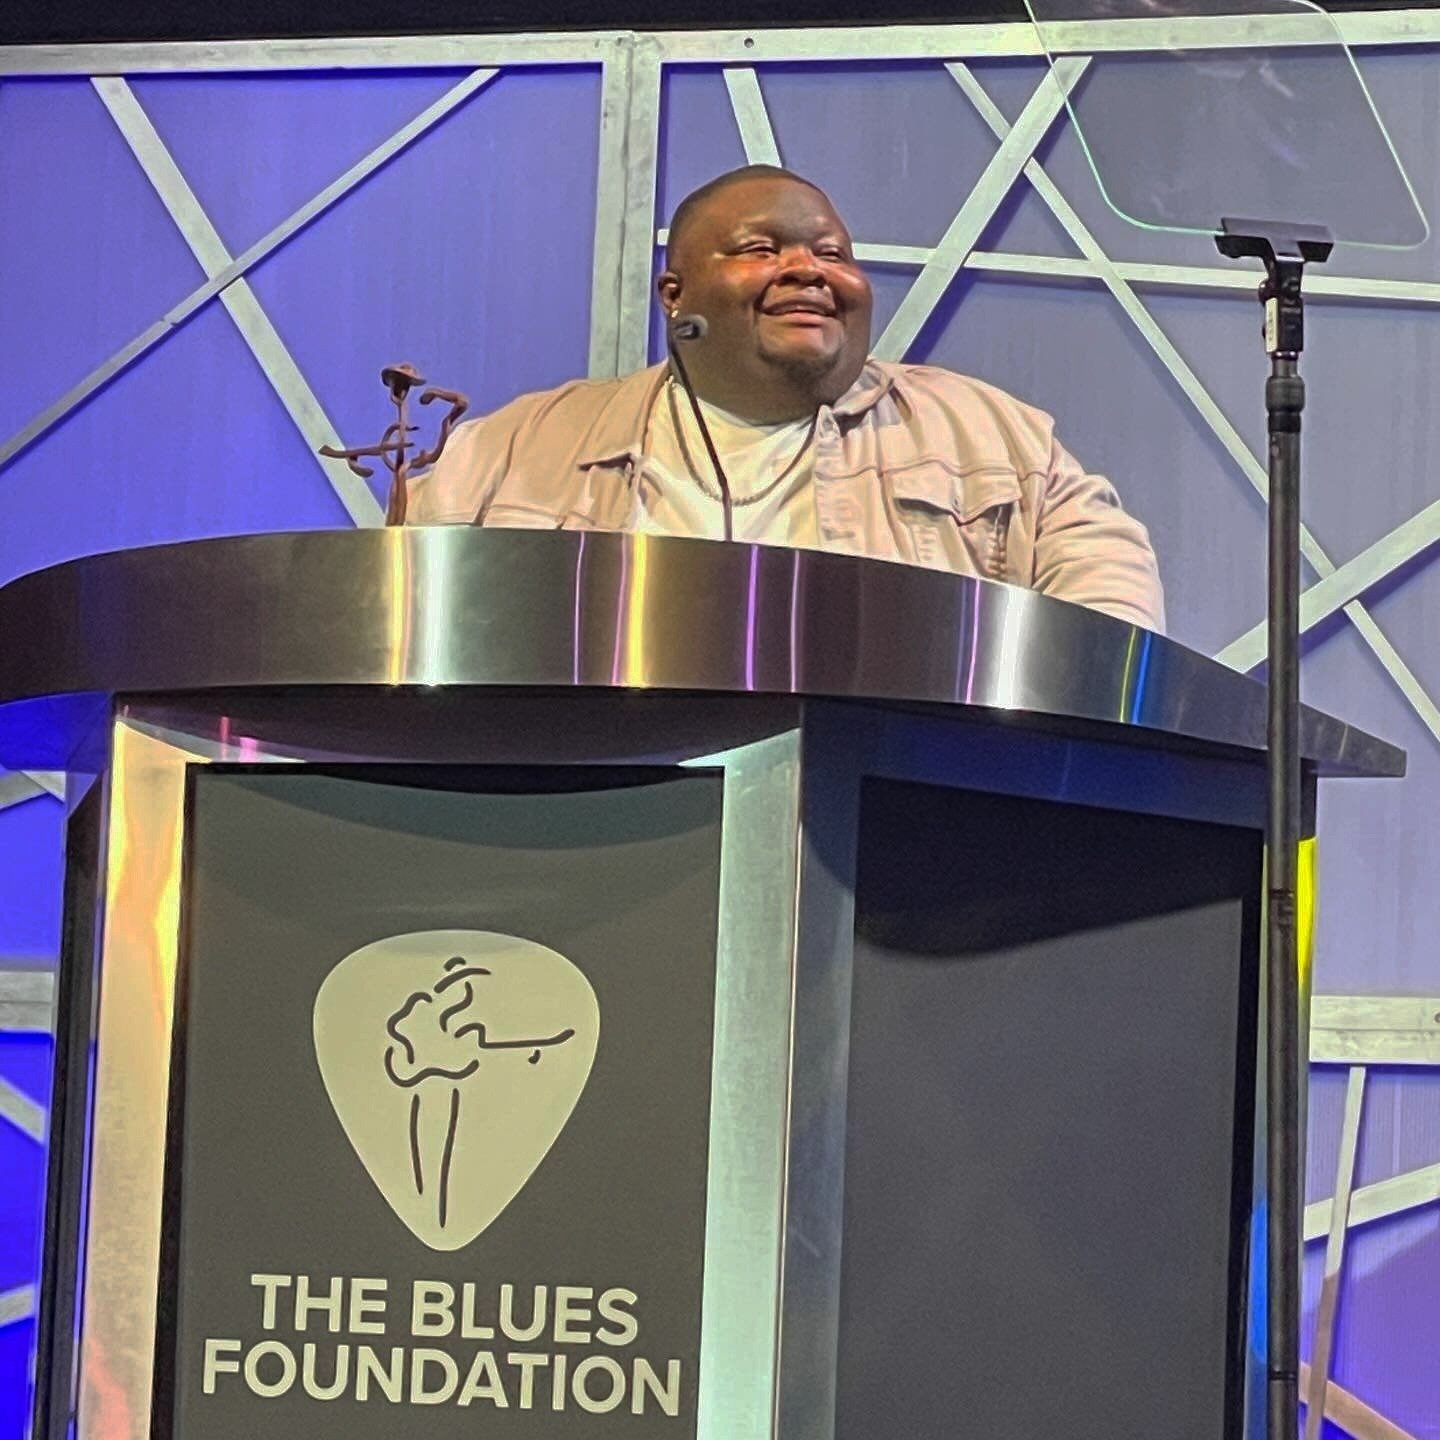 Congratulations to @callmekingfish who won FOUR awards at the Blues Foundation's Blues Music Awards in Memphis last night and thank you to the Blues Foundation for putting on such a wonderful event!